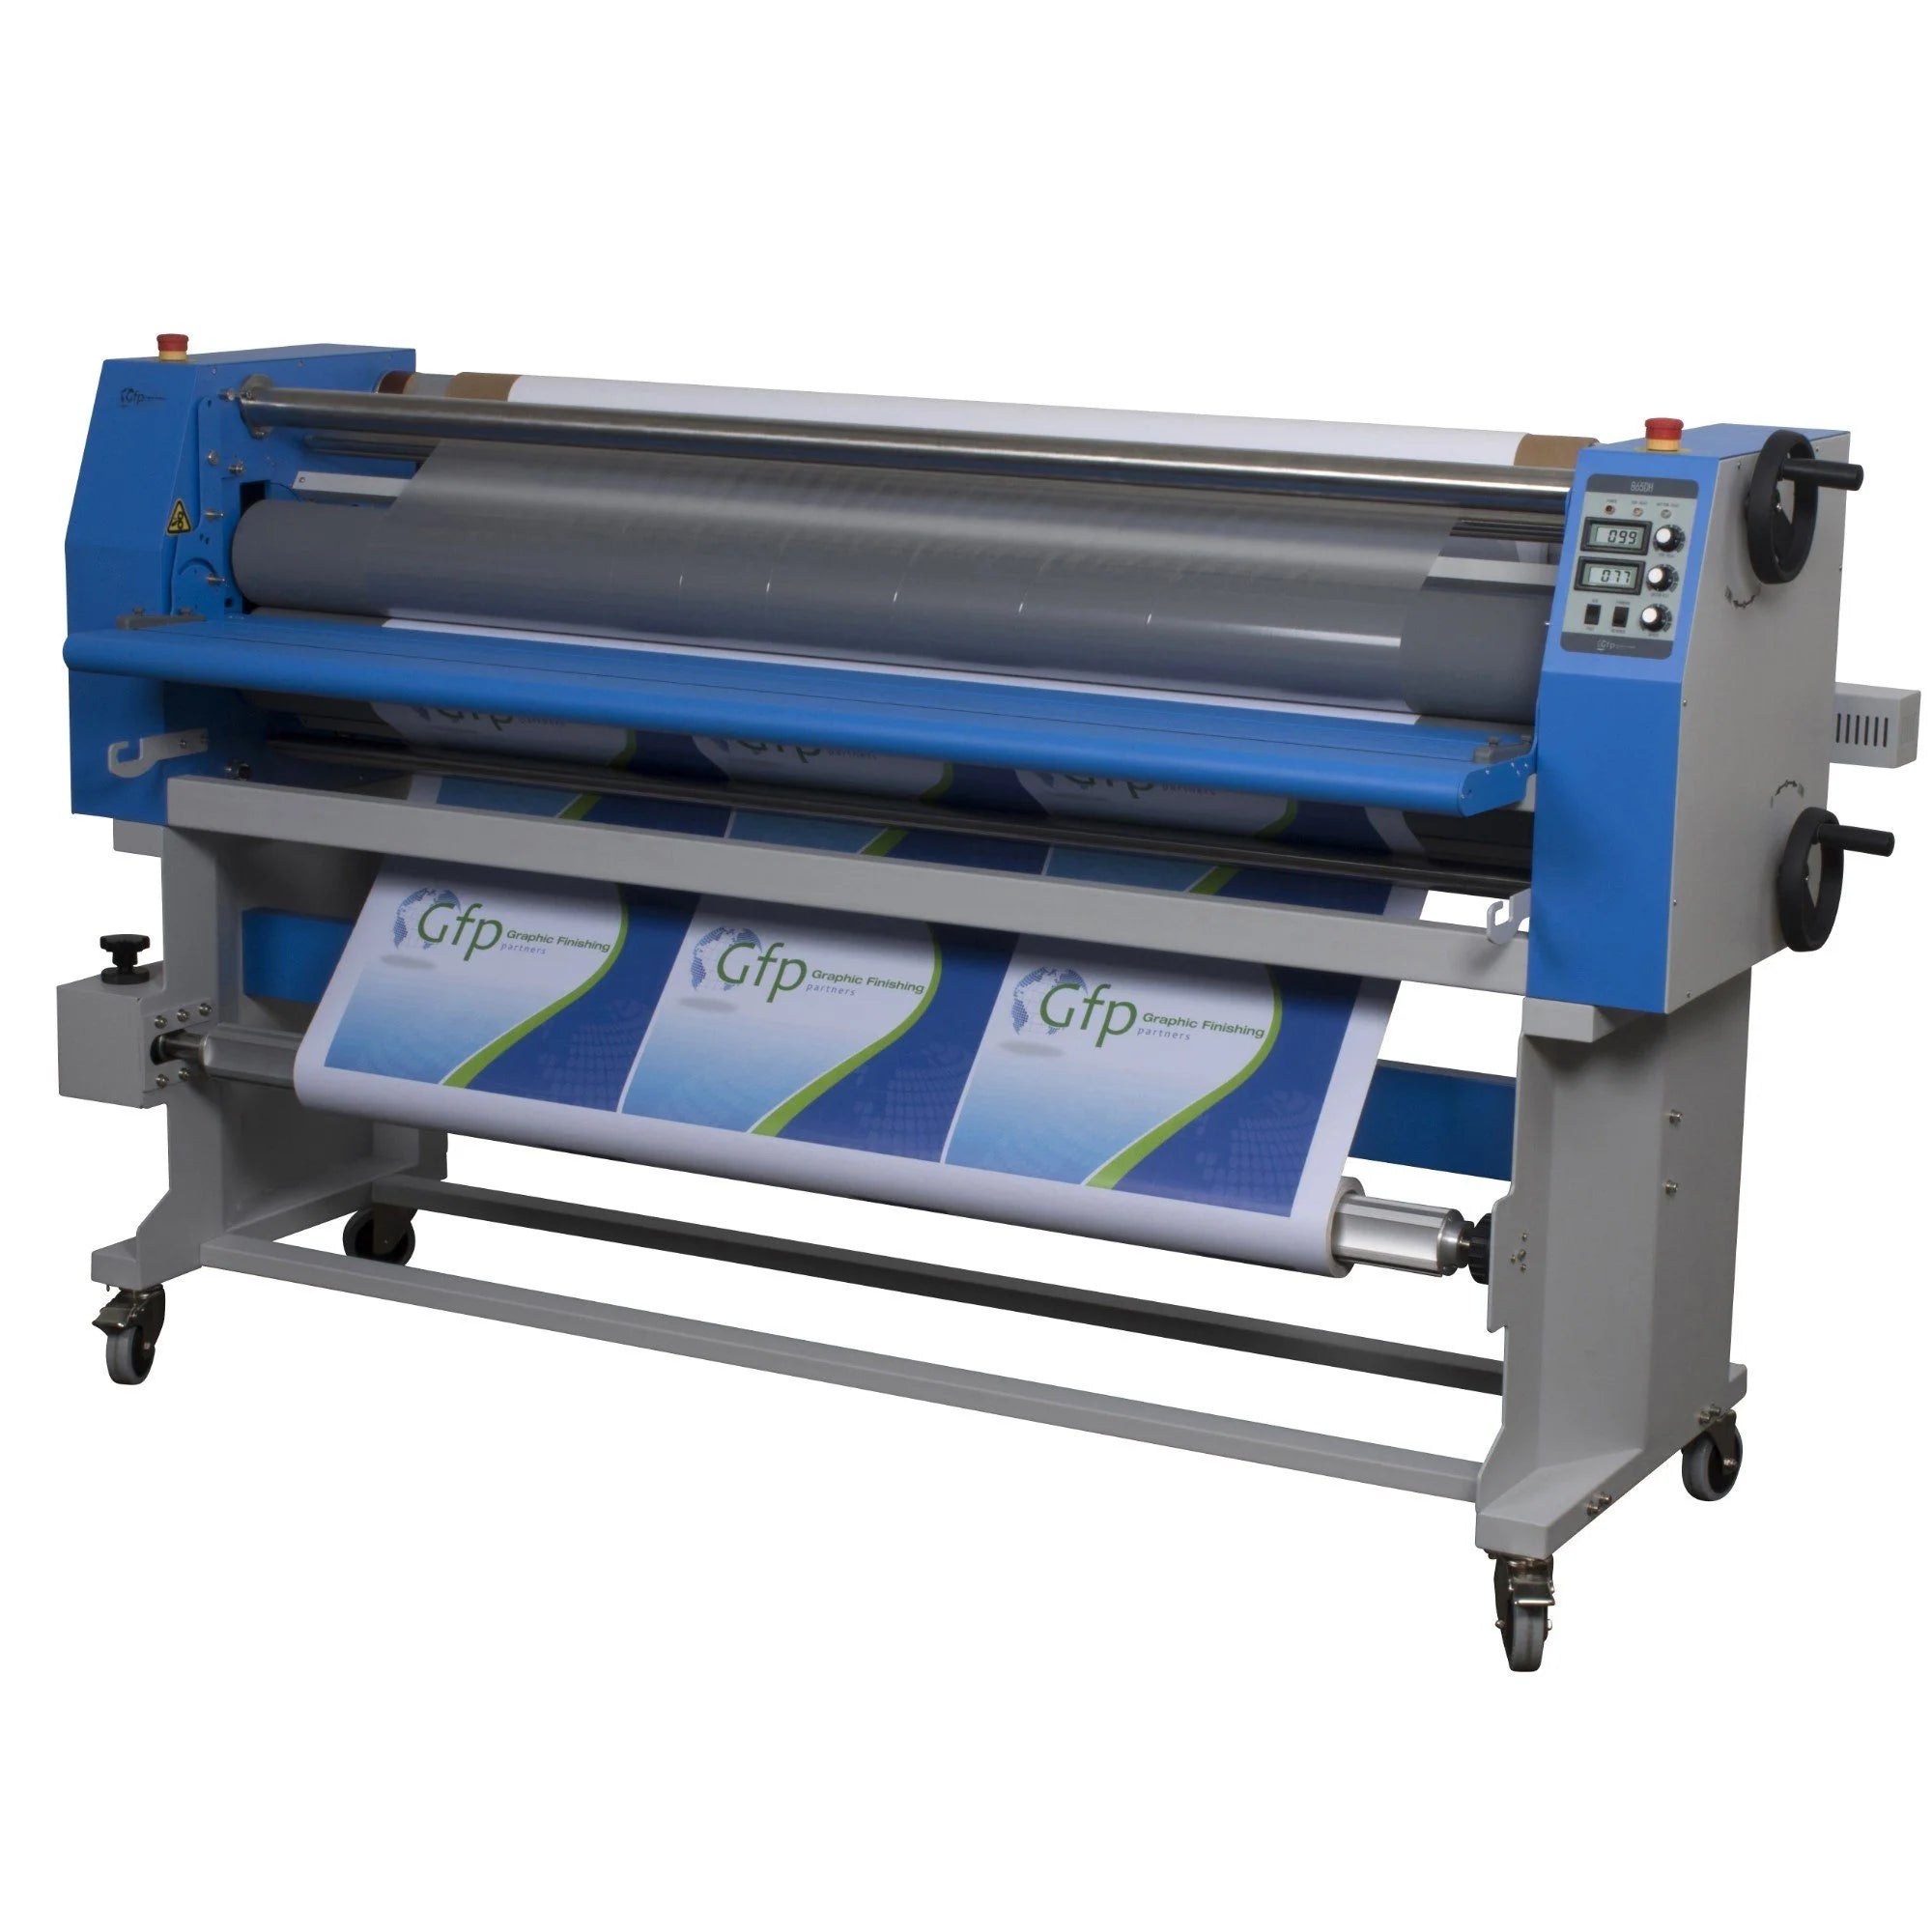 "GFP-865DH-3R Professional Dual Heat Laminator with Stand - 65" Eco Printers - GFP" - A high-performance dual heat laminator with a stand, specifically designed for 65" eco printers by GFP. Experience professional-grade laminating with advanced features for optimal results.